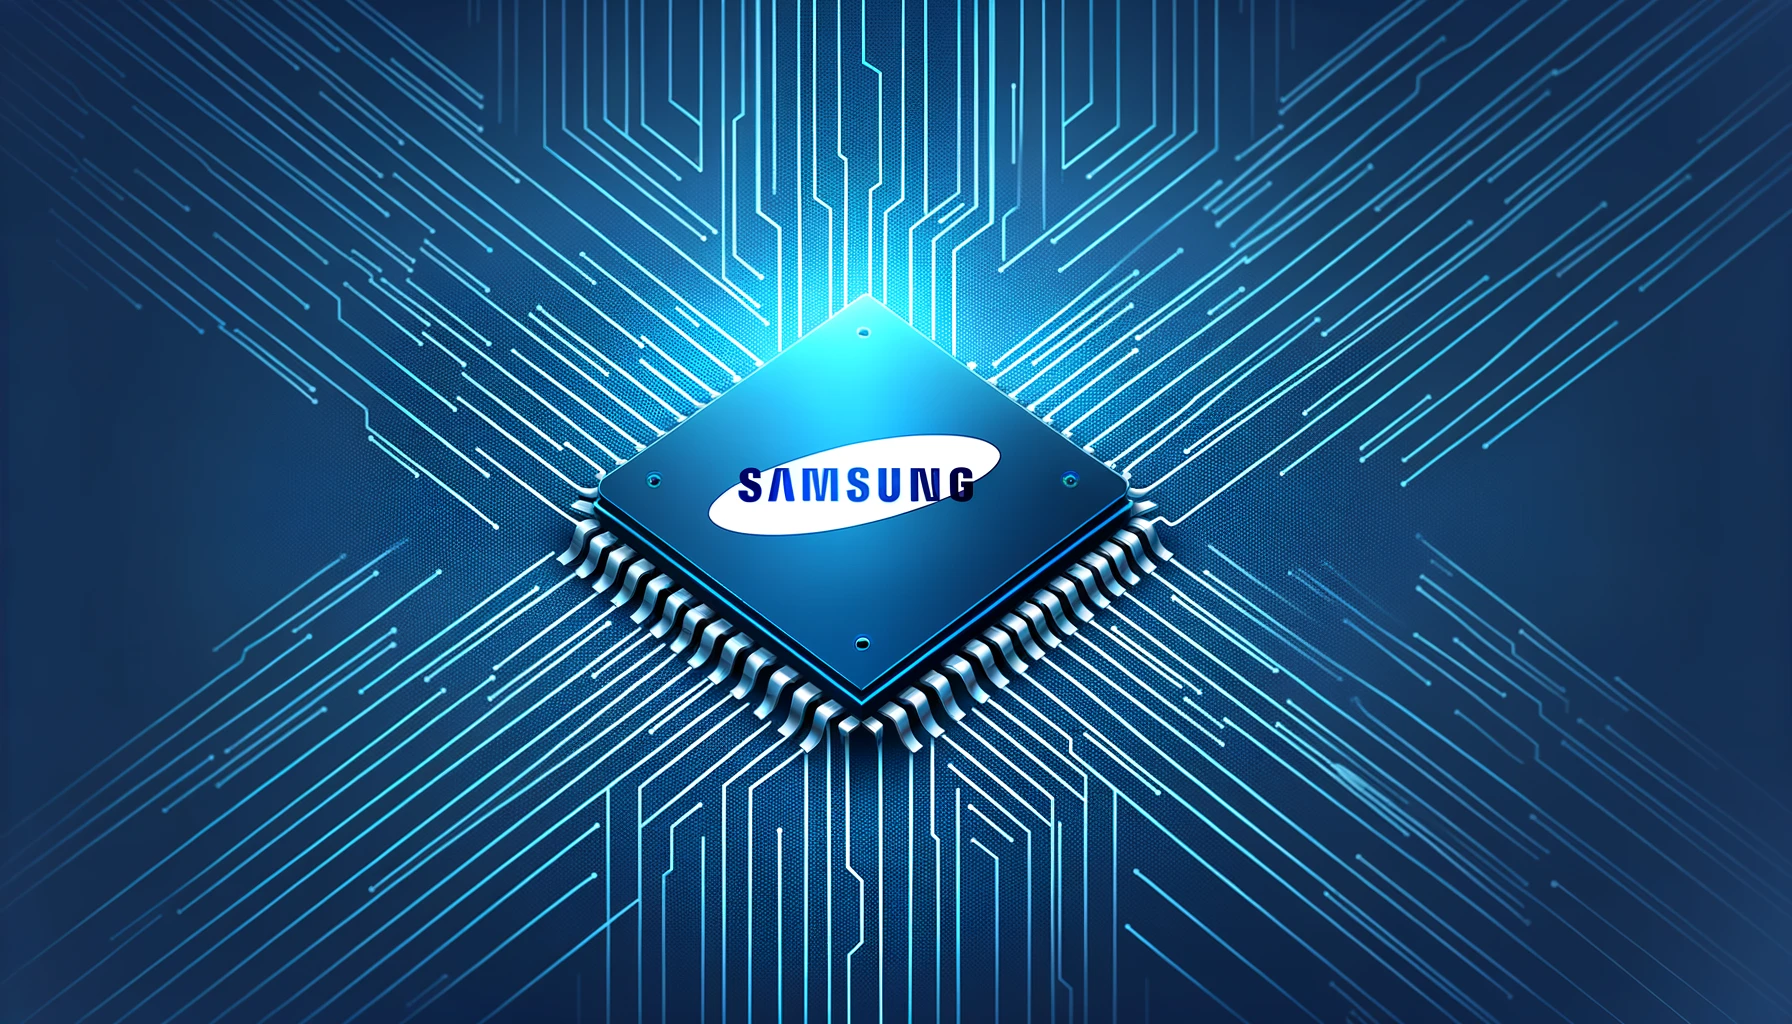 Samsung is striving to reclaim its position as the world's top chipmaker within the next few years.